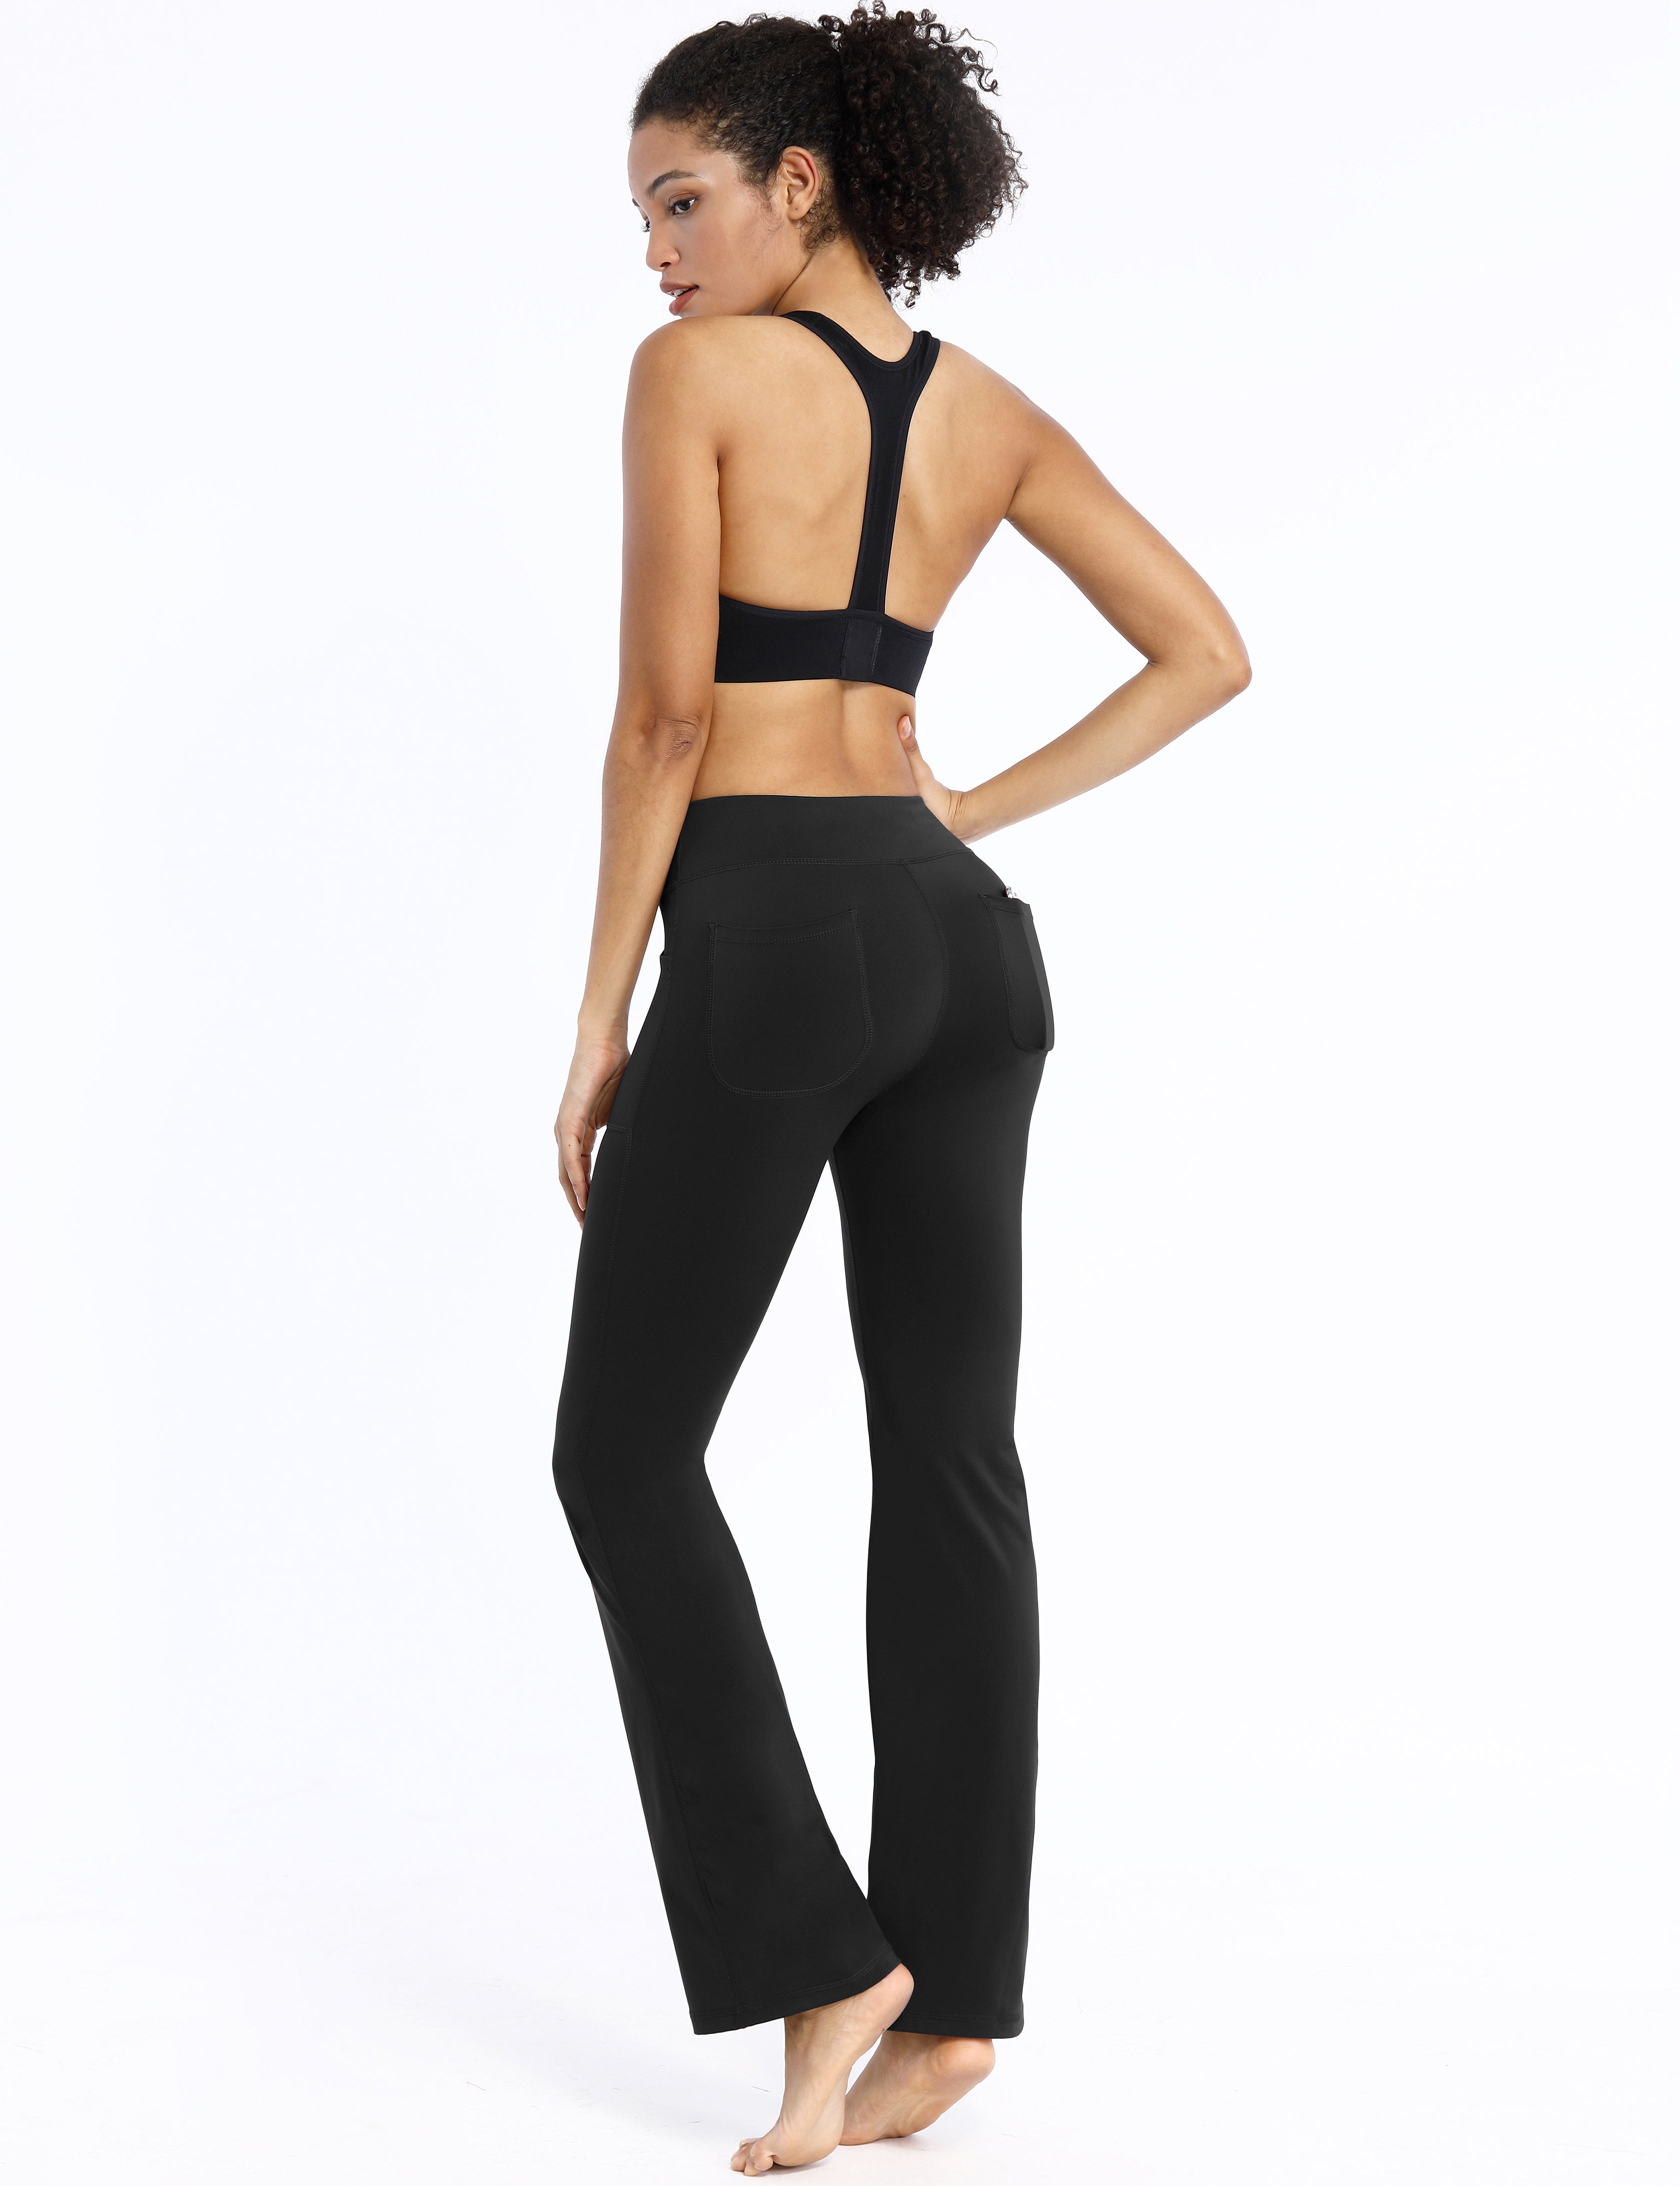 29" 31" 33" 35" Bootcut Leggings with Pockets black ins_Gym